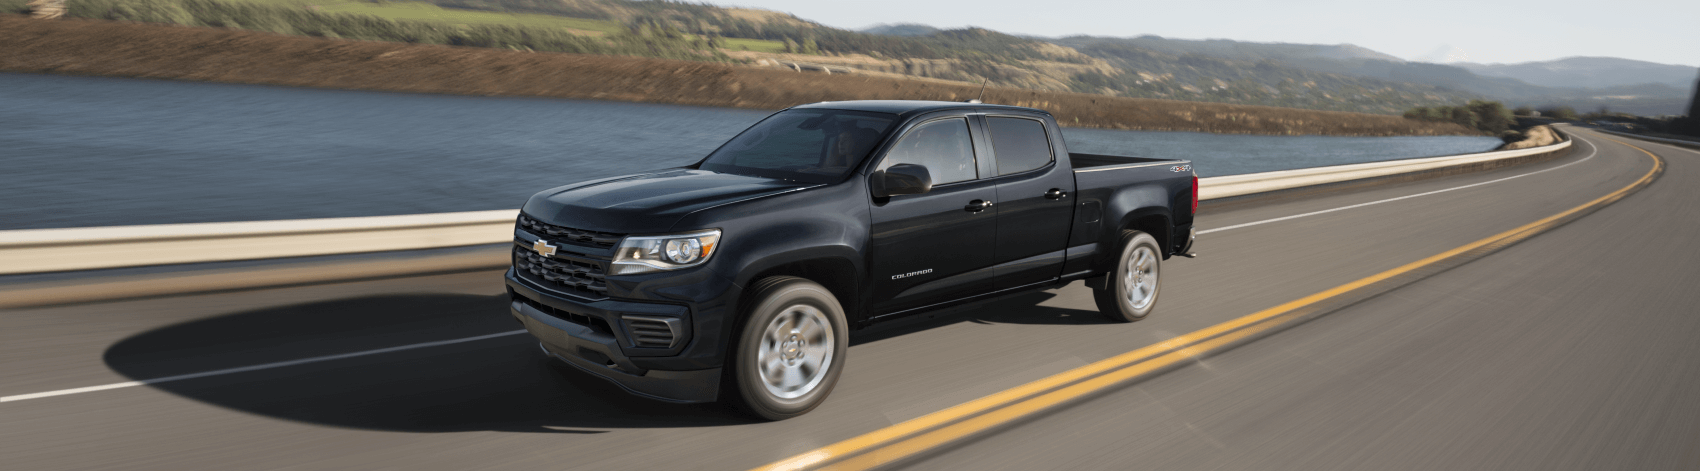 2021 Chevy Colorado Black Highway River Andy Mohr Speedway Chevy